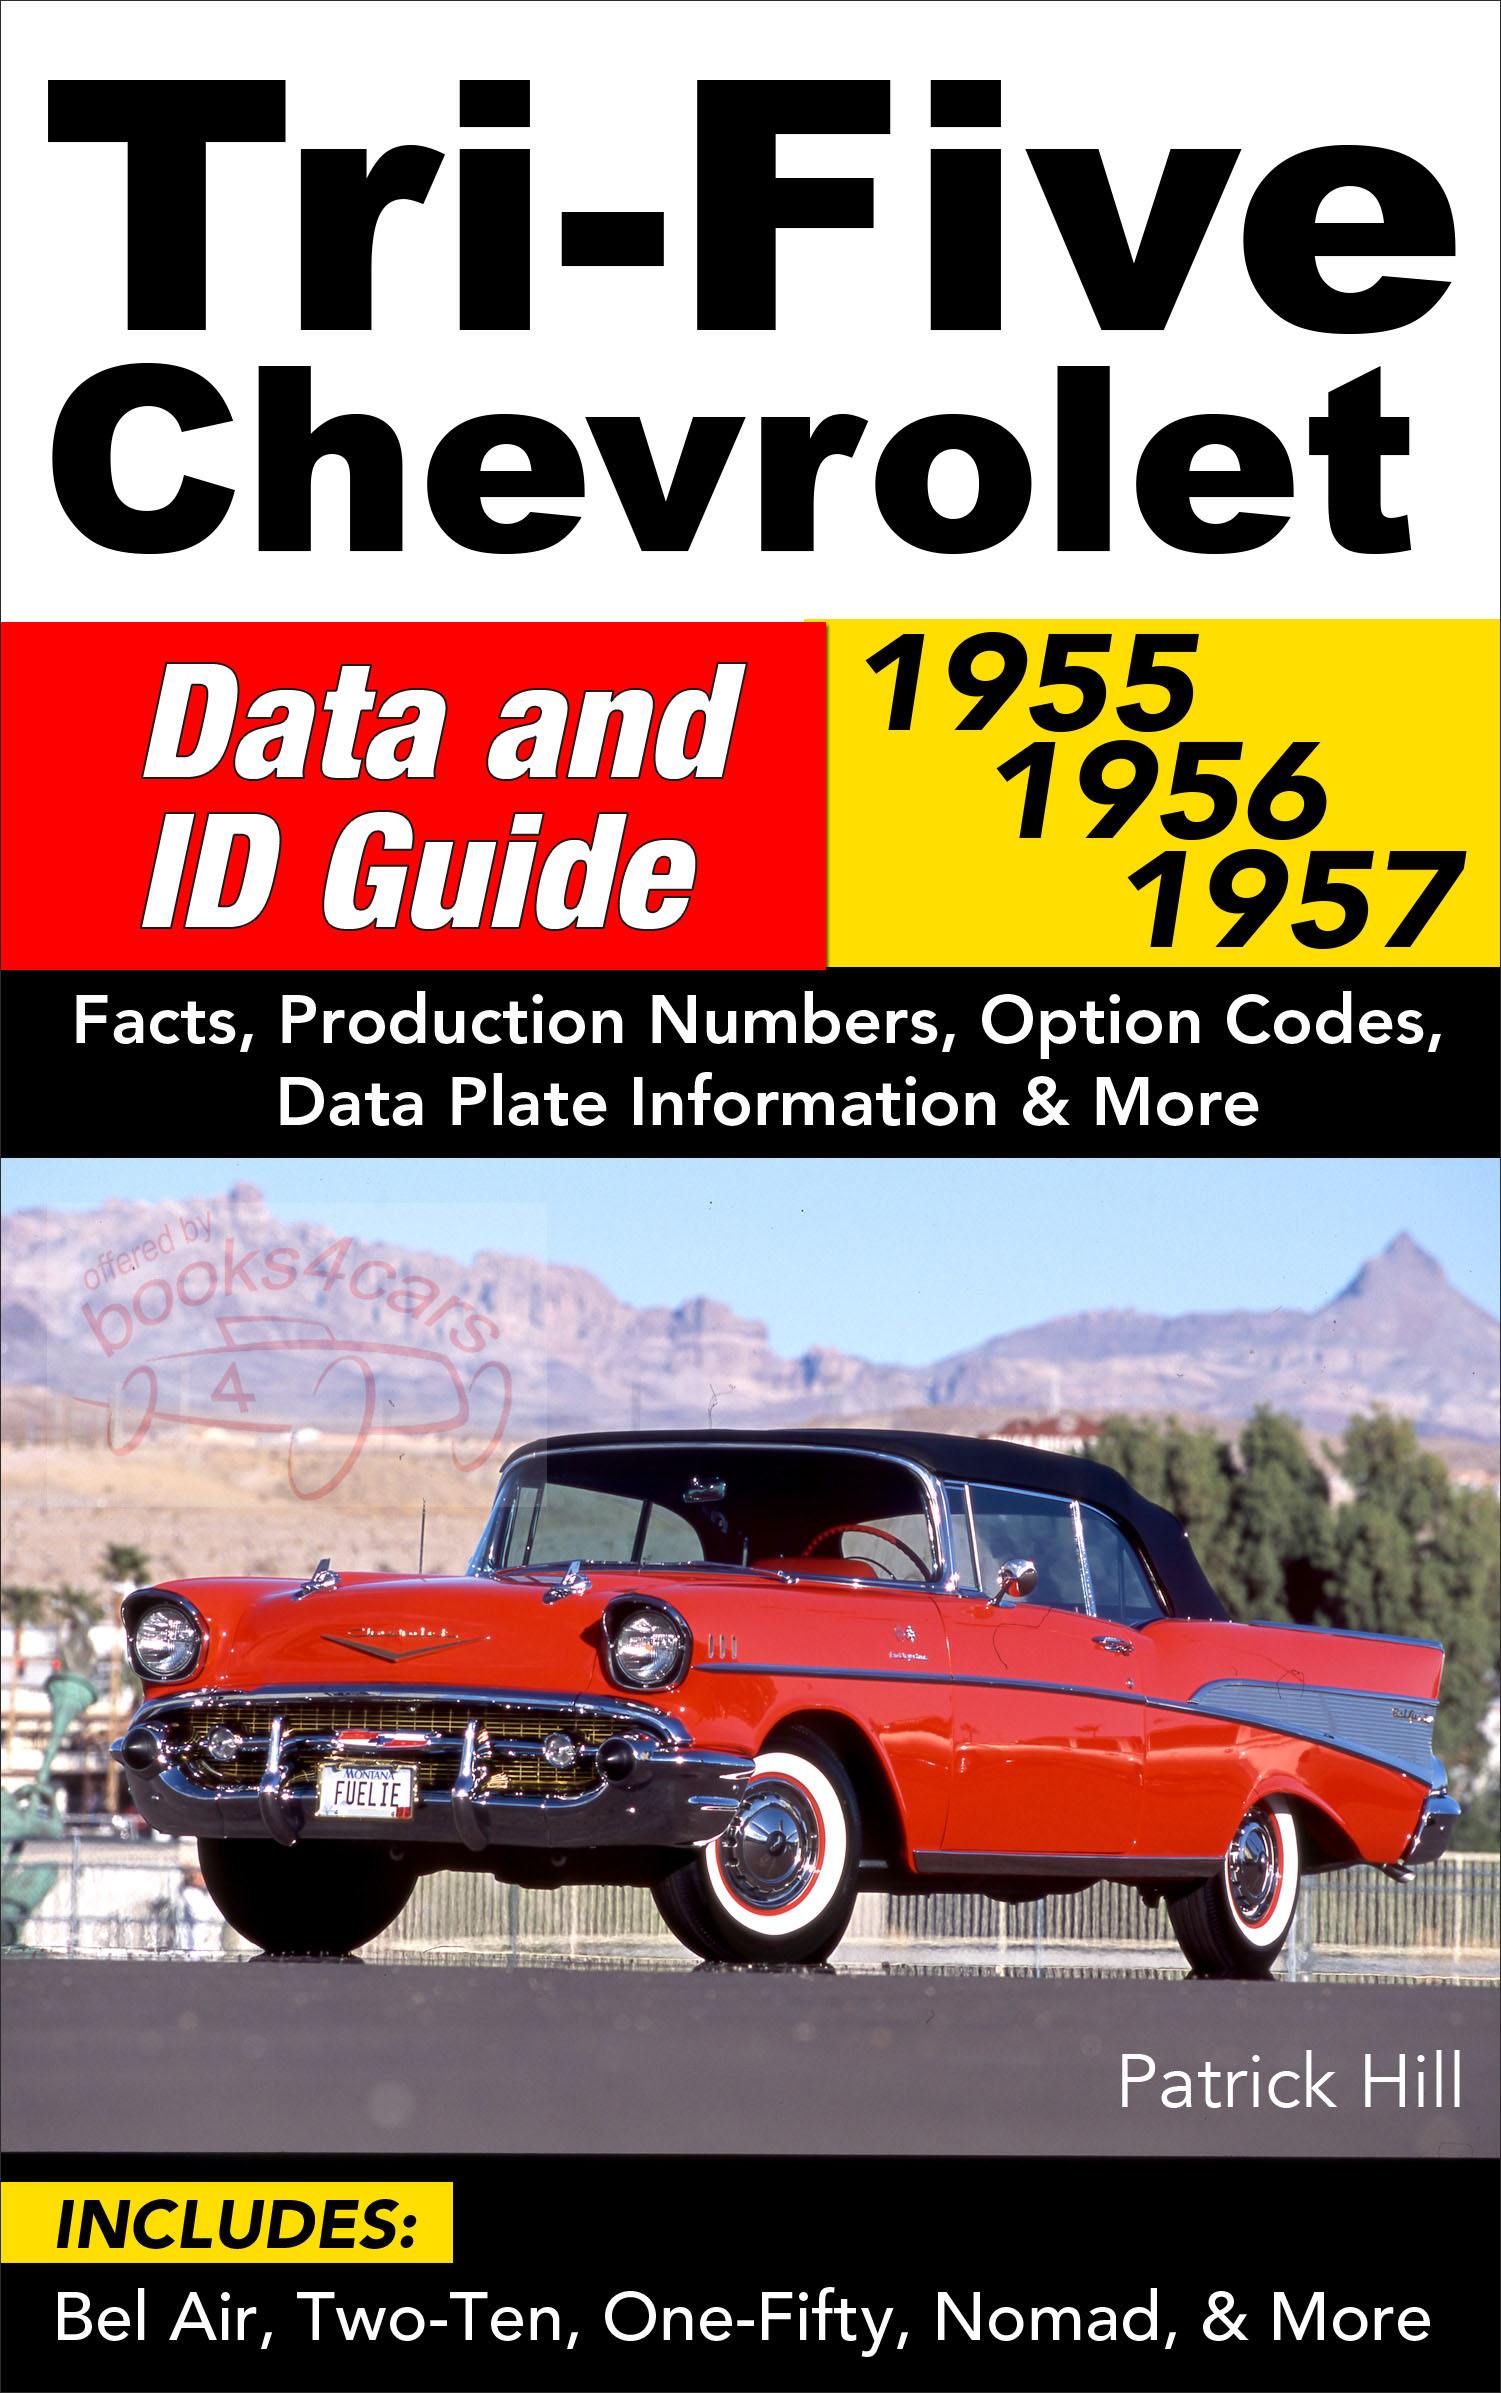 55-57 Tri-Five Chevrolet Data & ID Guide 192 pages for Bel Air Two Ten One Fifty Nomad & more by P Hill 210 150